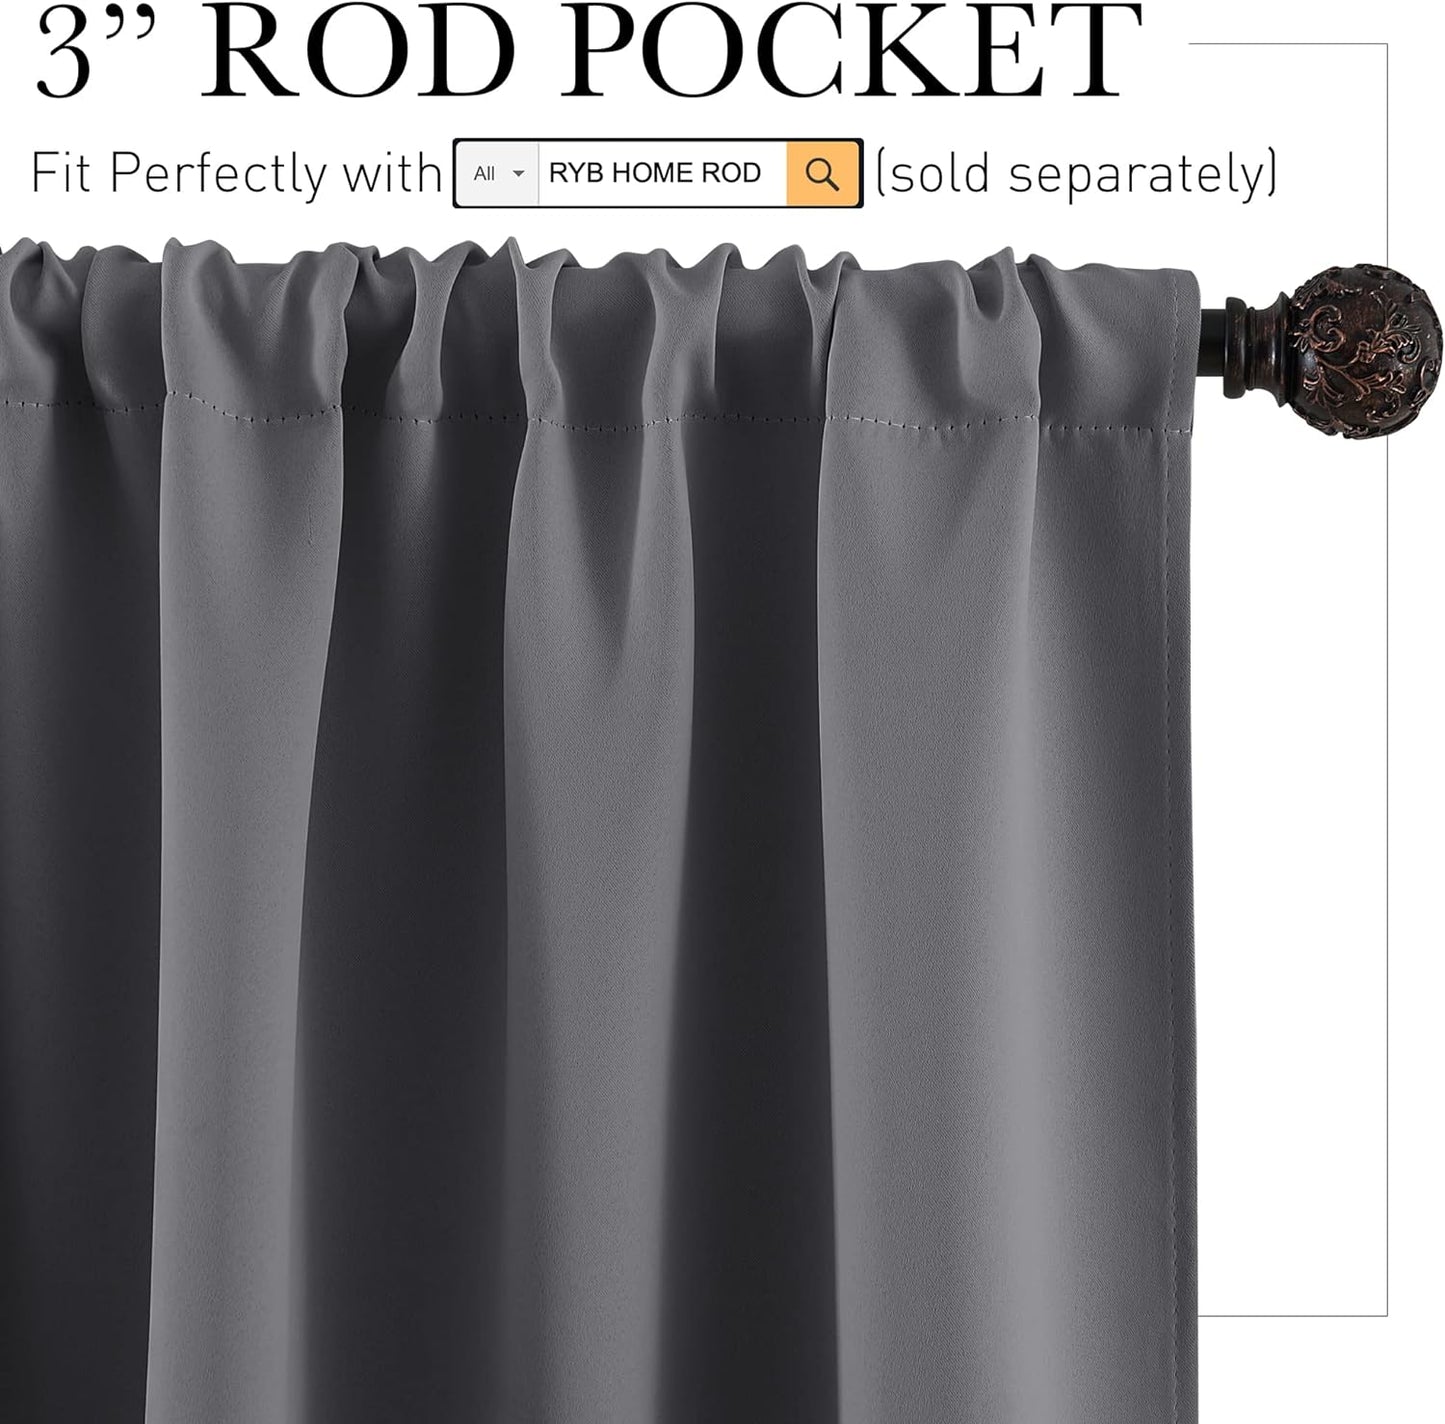 RYB HOME Blackout Curtains Thermal Insulated Panels Decor Slot Top Rod Pocket Blackout Drapes for Living Room Small Window Dressing Energy Saving & Room Darkening, 42 X 54, Grey, 2 Pieces  RYB HOME   